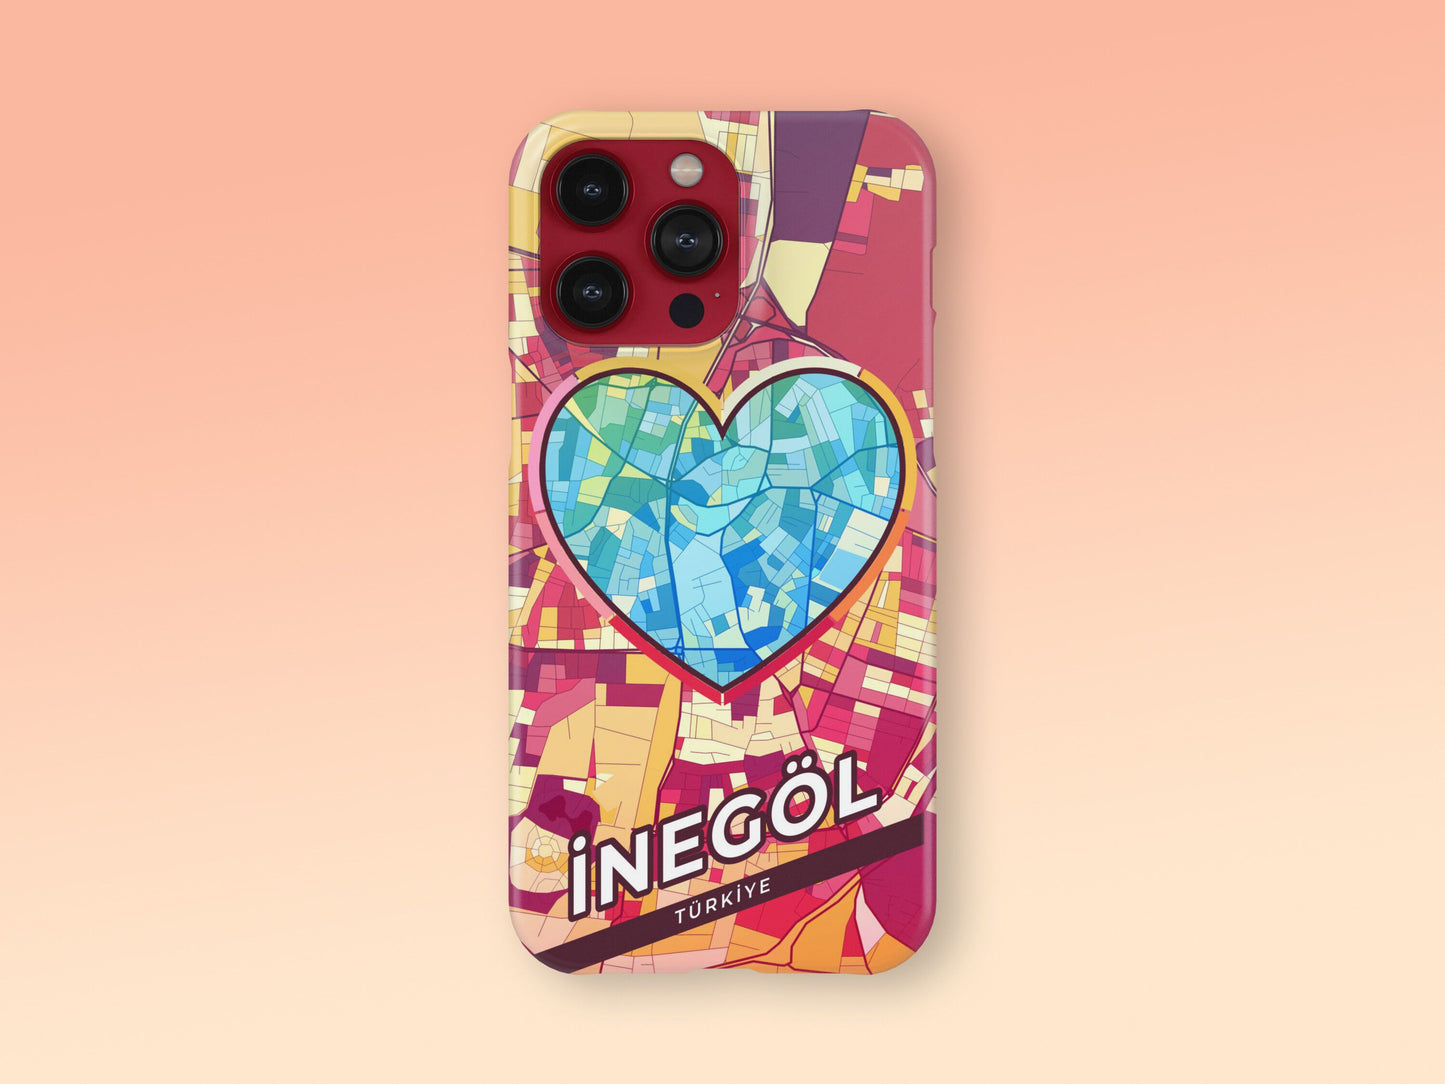 İnegöl Turkey slim phone case with colorful icon. Birthday, wedding or housewarming gift. Couple match cases. 2